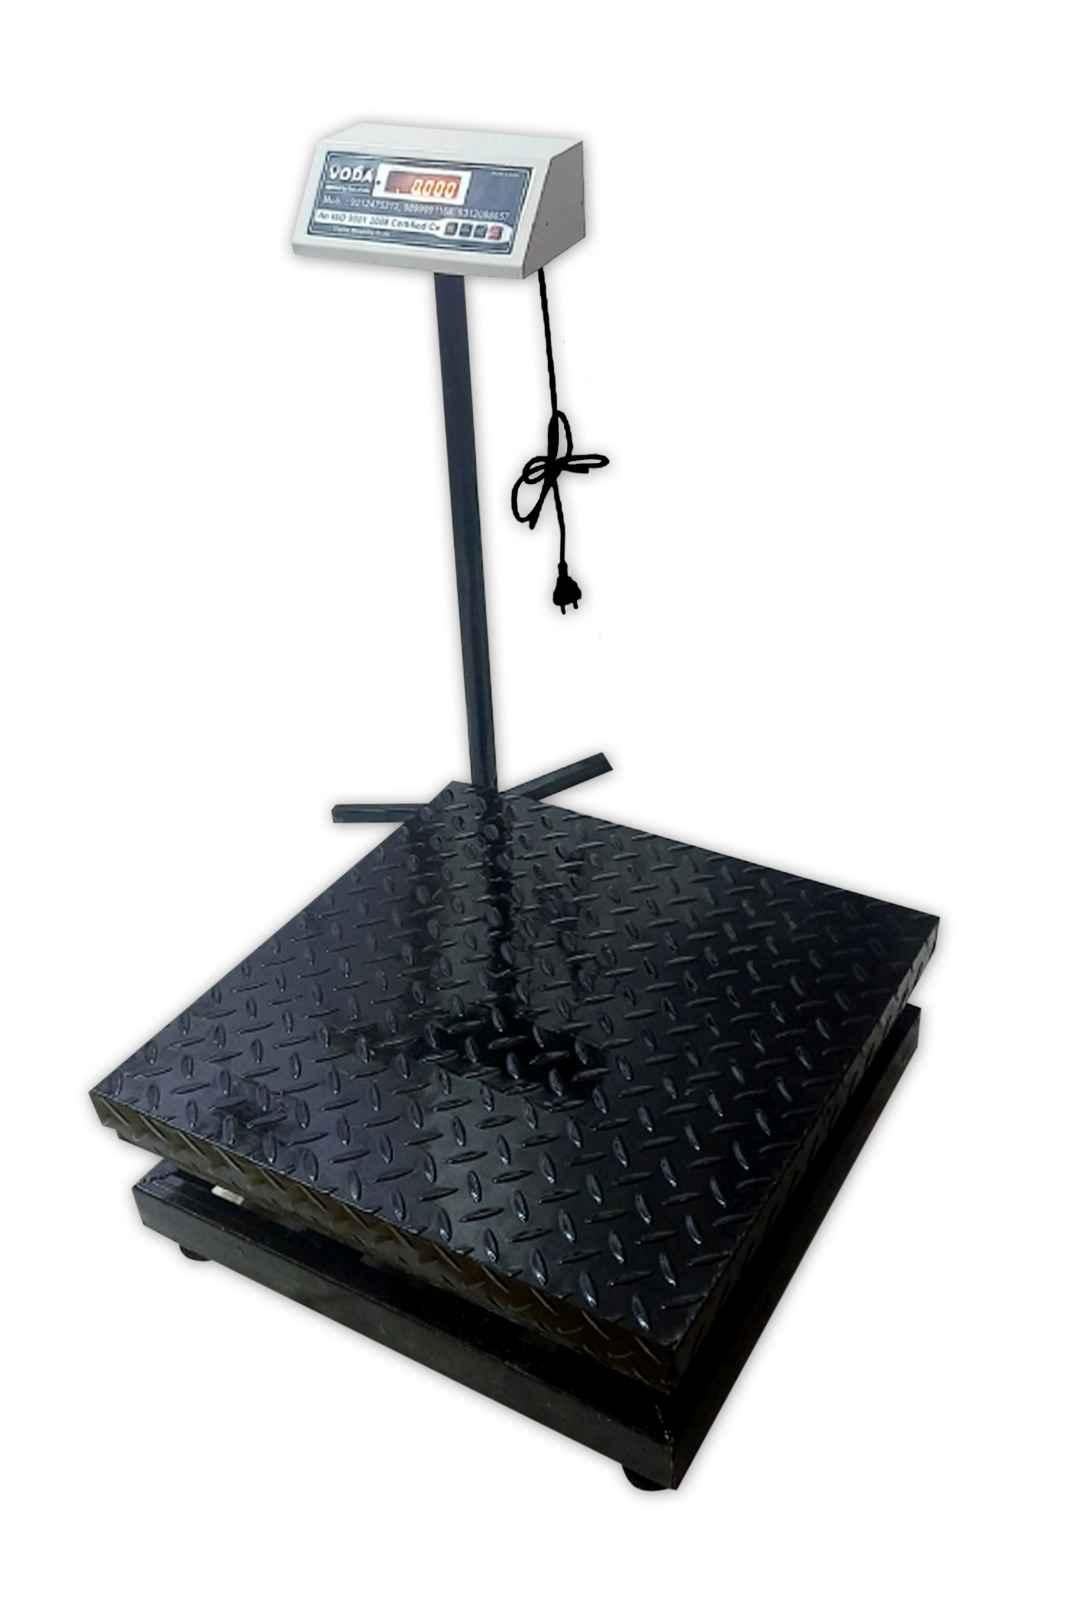 Buy Voda 100kg and 10g Accuracy Heavy Duty Platform Weighing